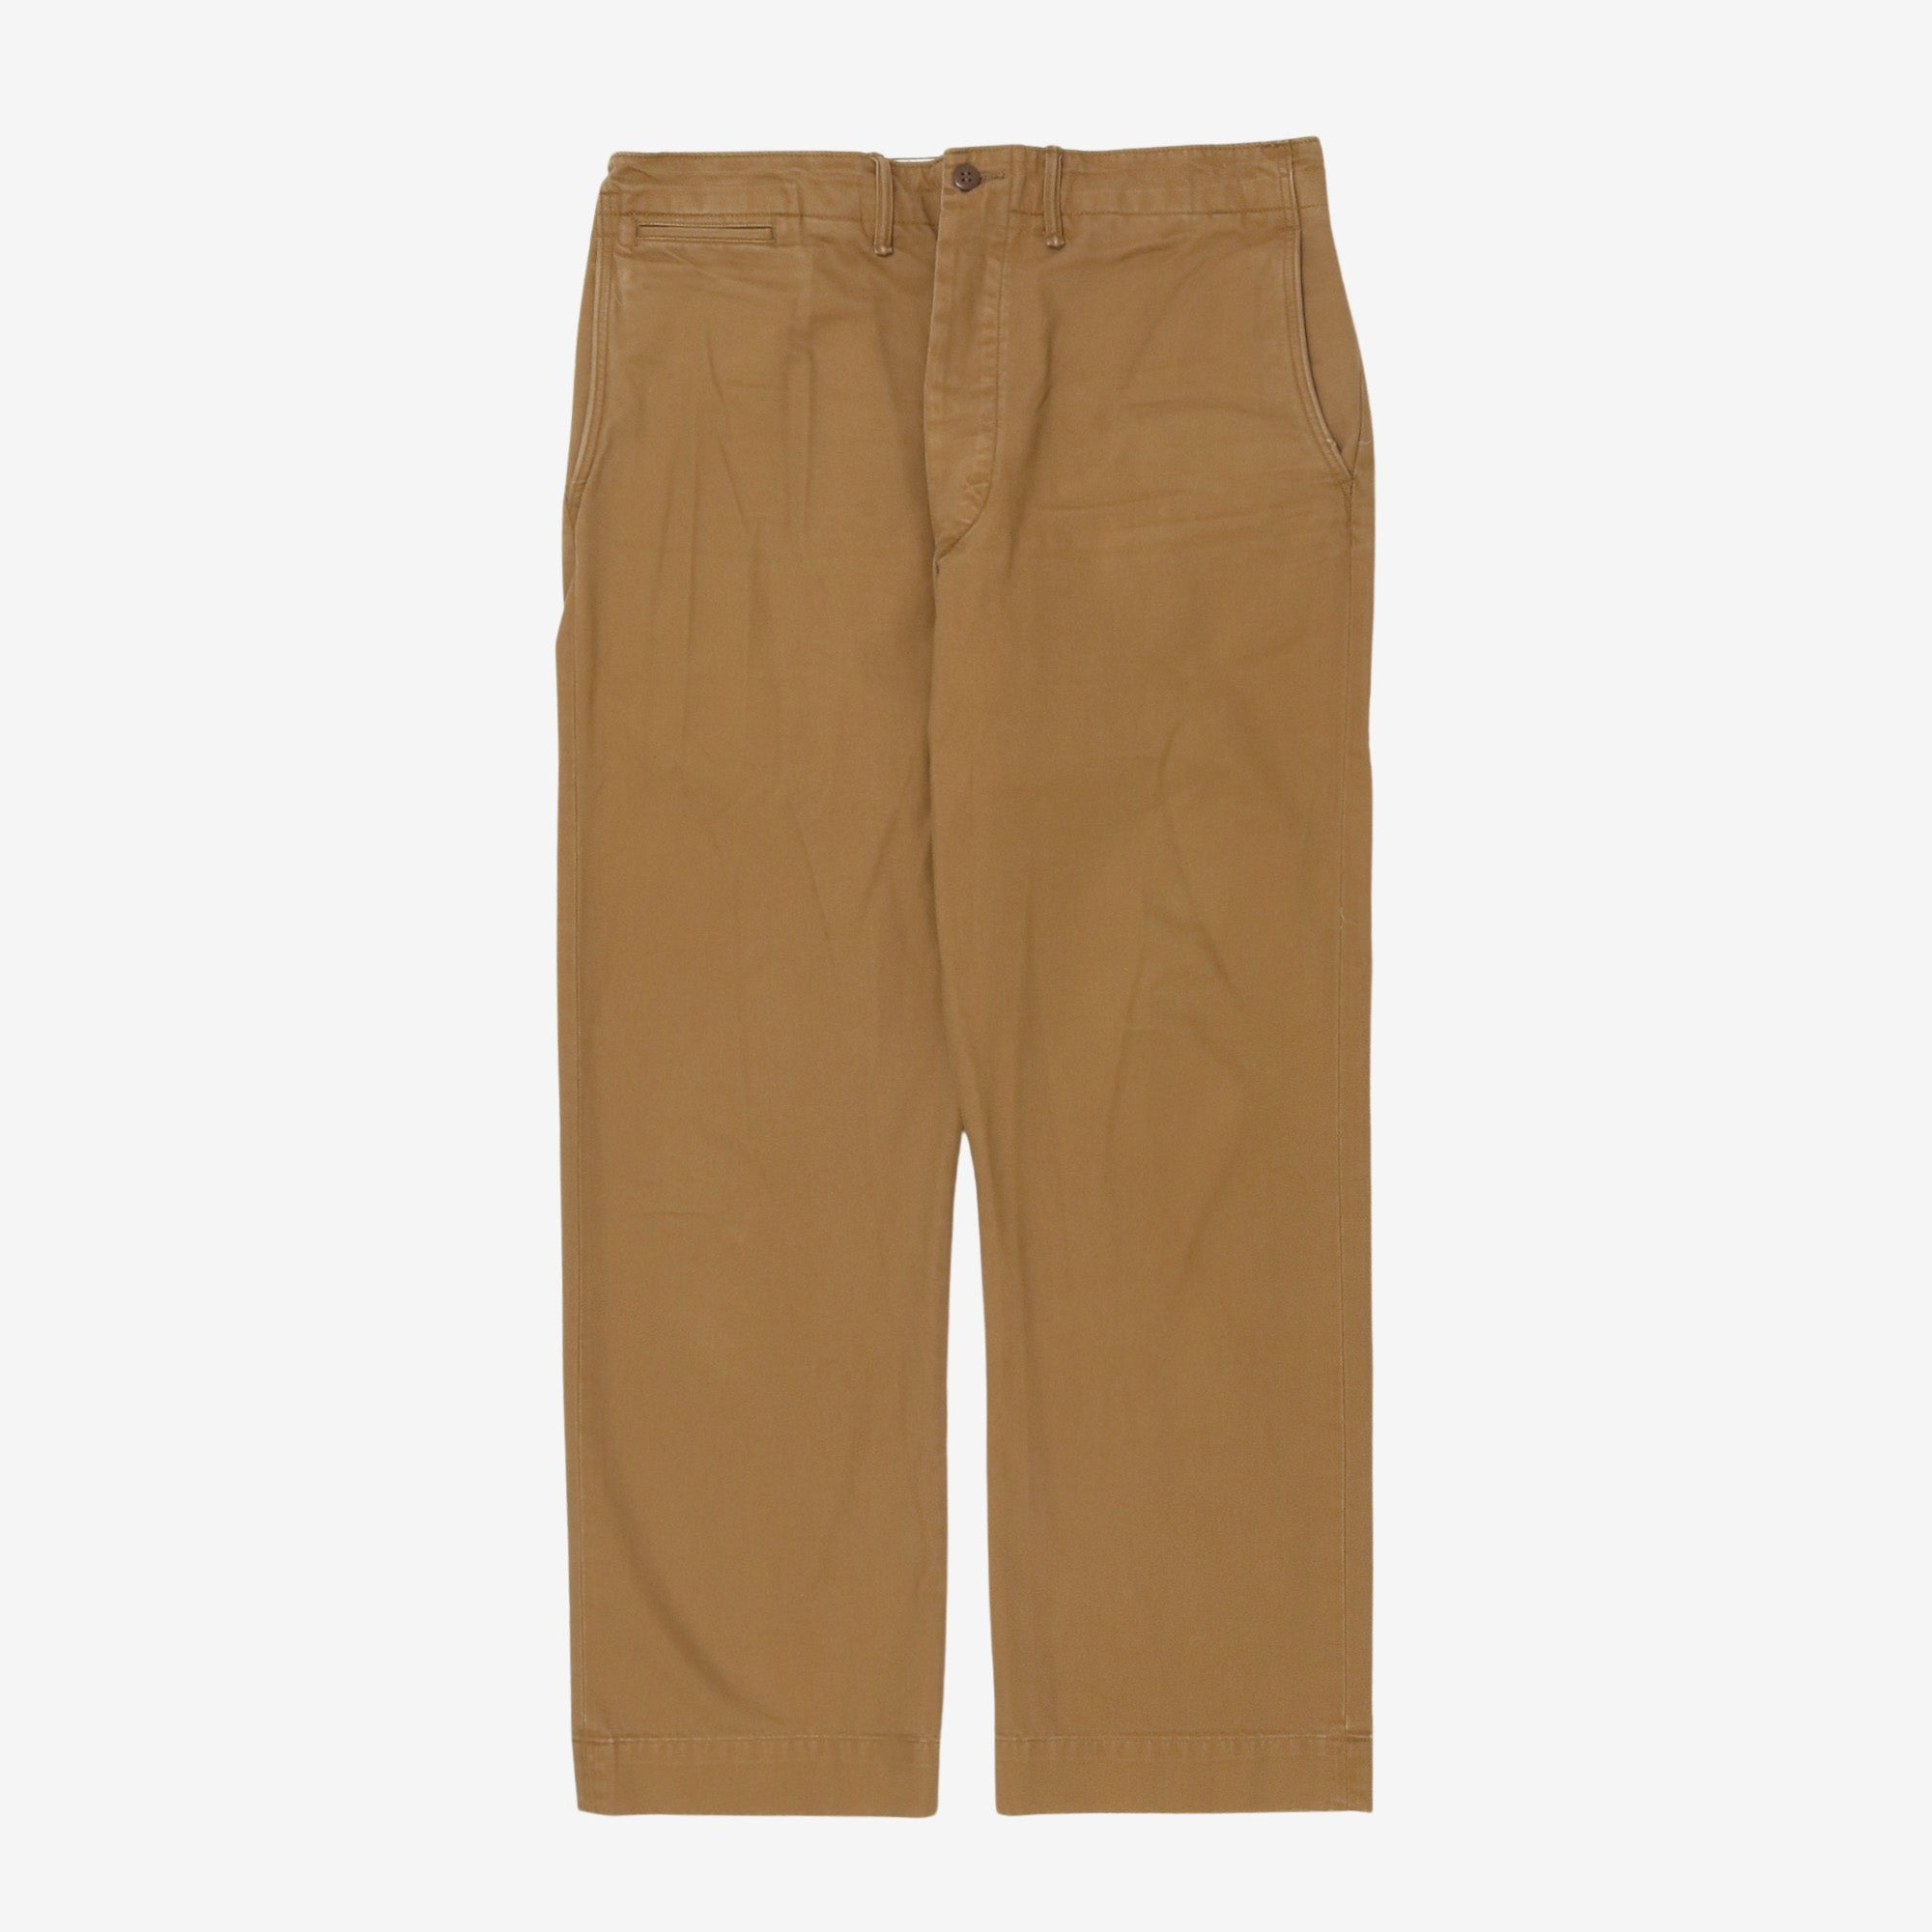 Officer Chino Pant (36W x 30L)